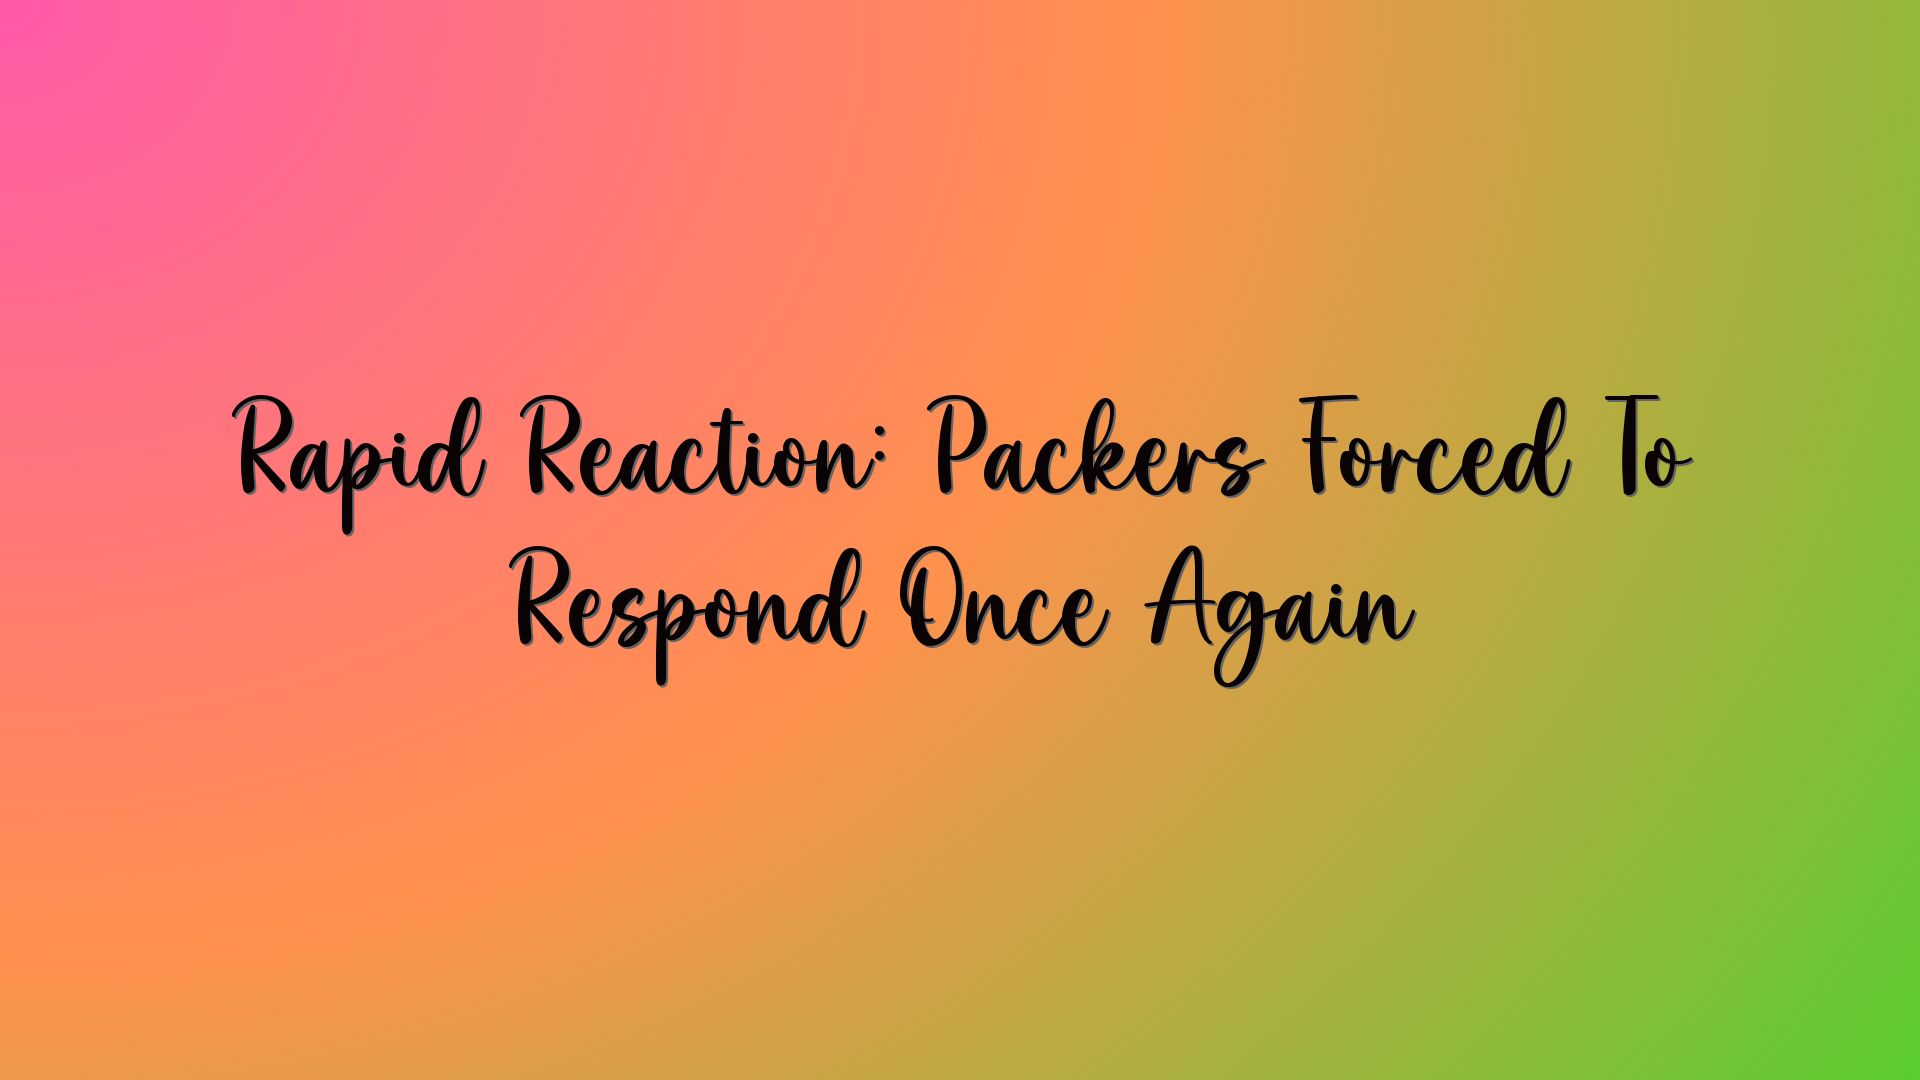 Rapid Reaction: Packers Forced To Respond Once Again